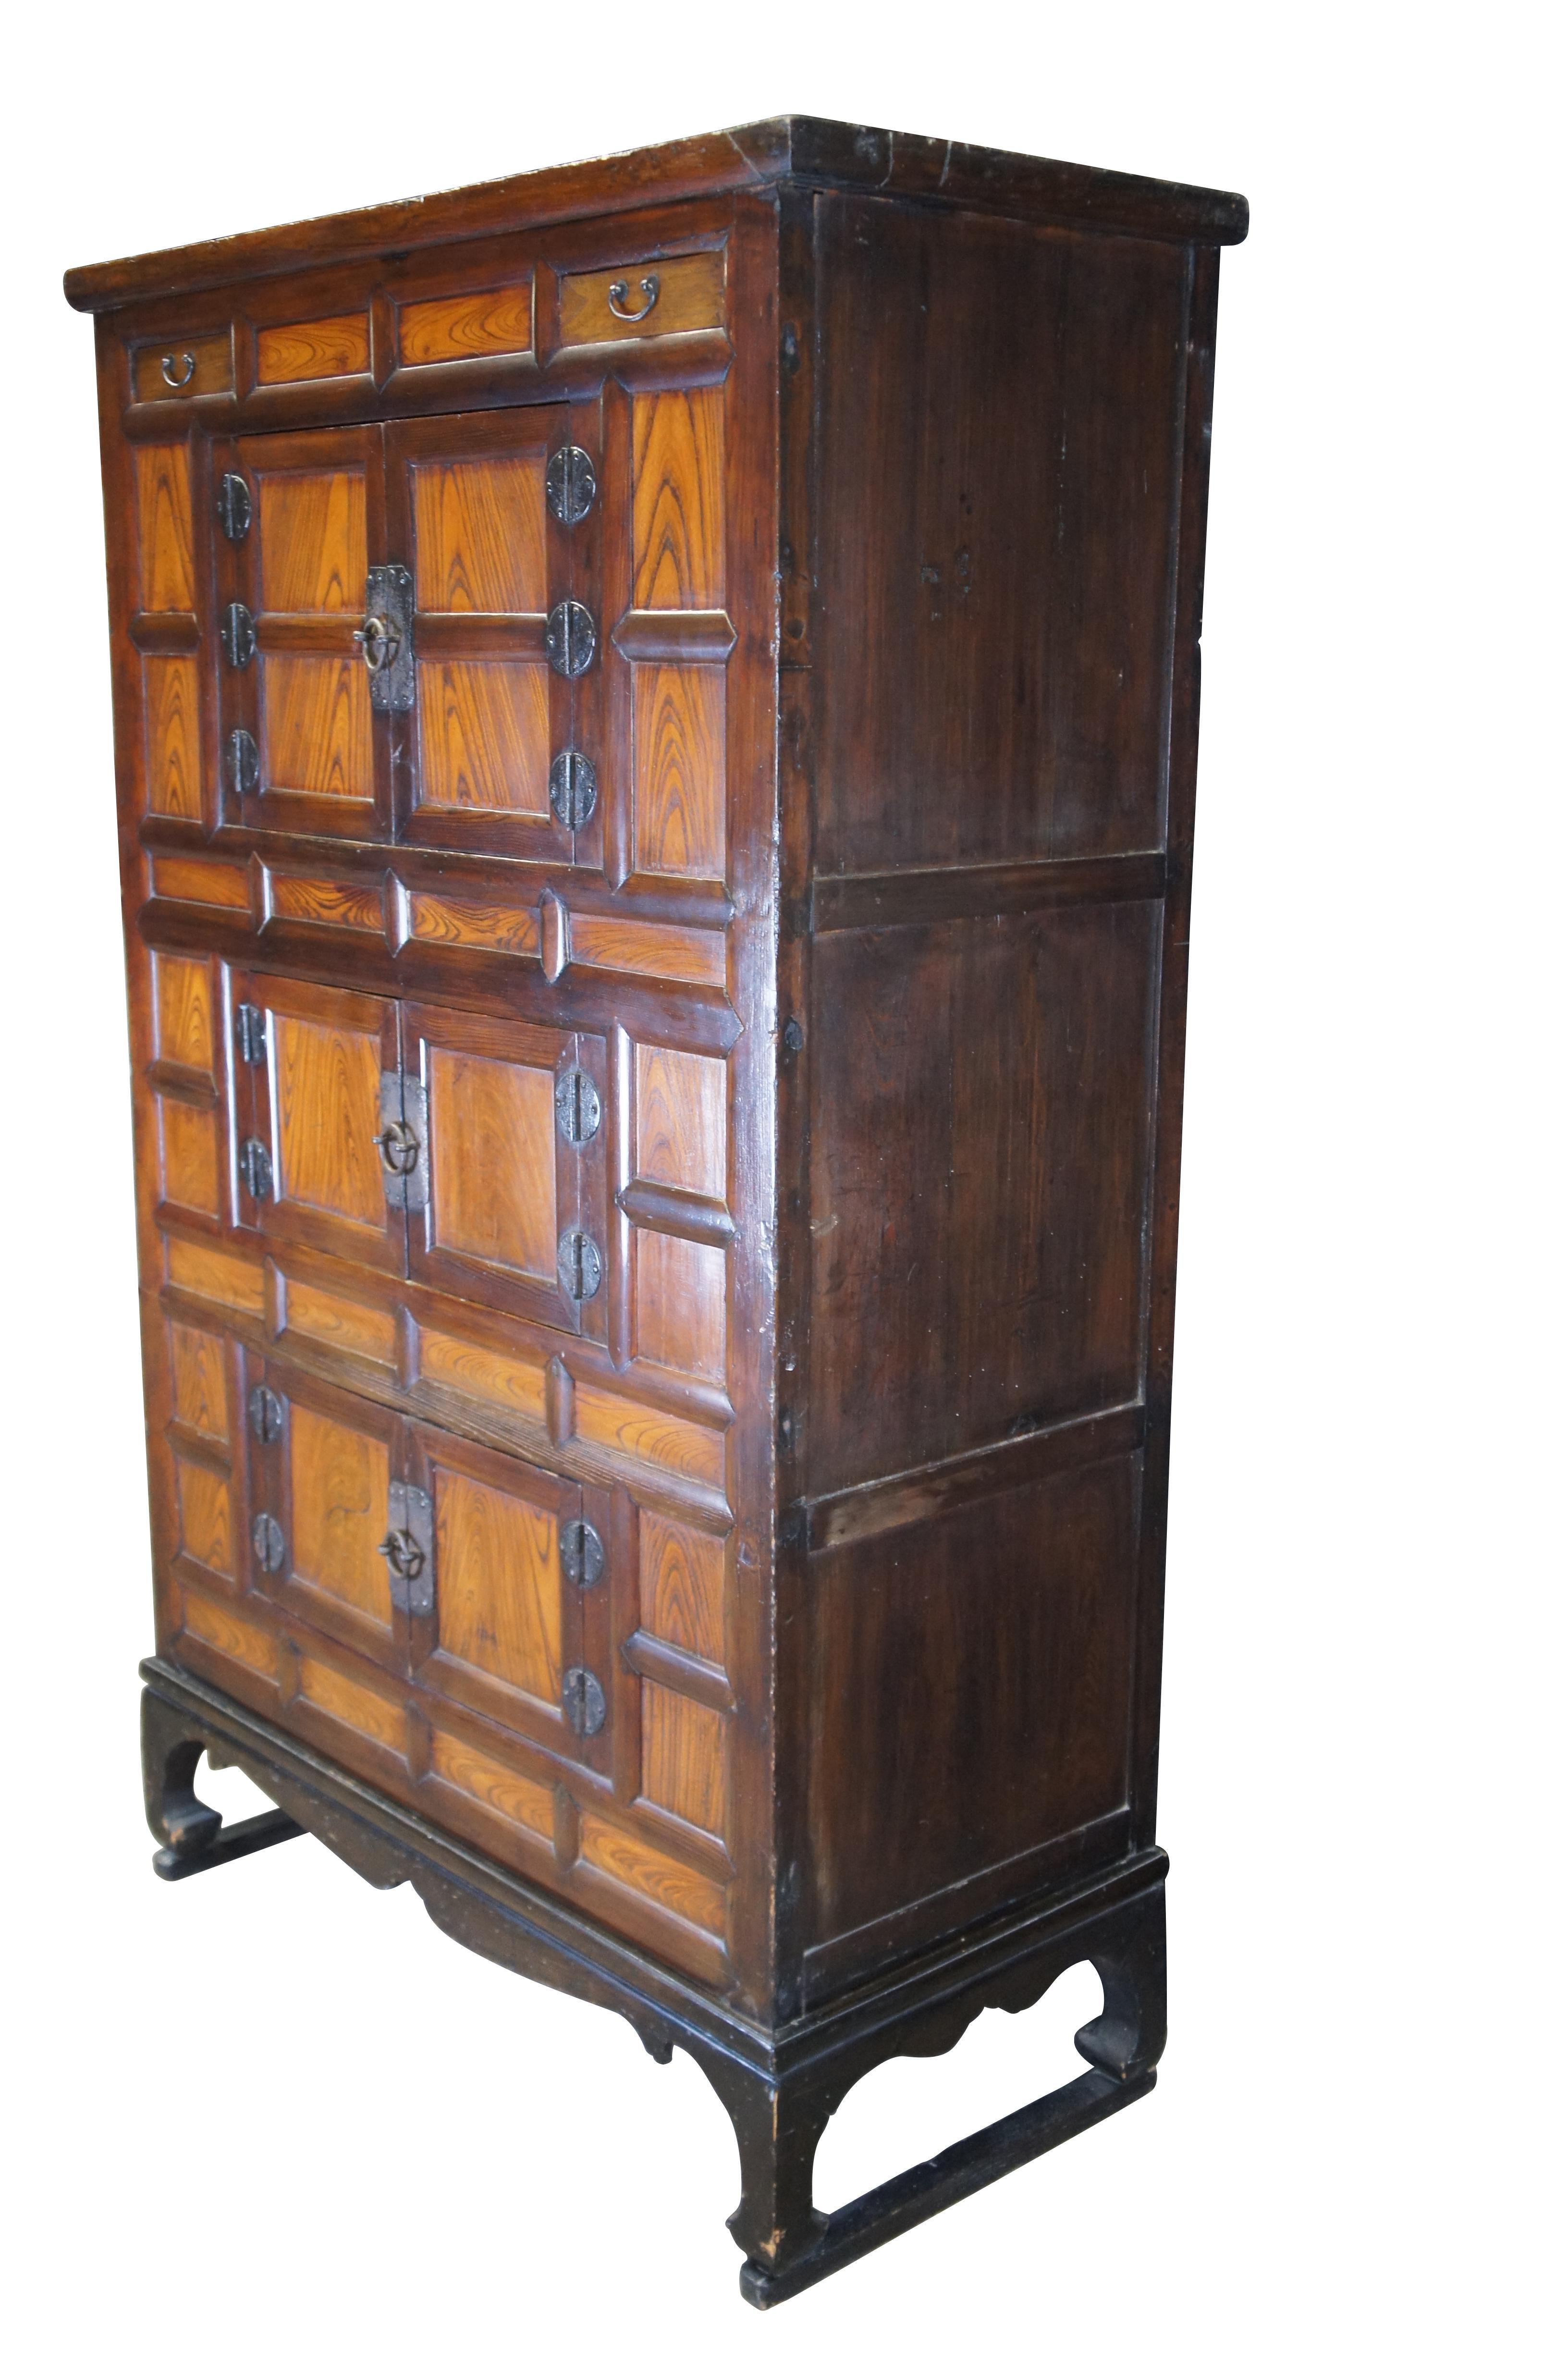 20th Century Korean Tansu Nong Bandaji tallboy wedding chests / cabinet / armoire made of elmwood featuring a two tone wood grain and brass hardware.

Korean Bandaji chest or trunk featuring elm frame with brass hardware. The Korean name bandaji